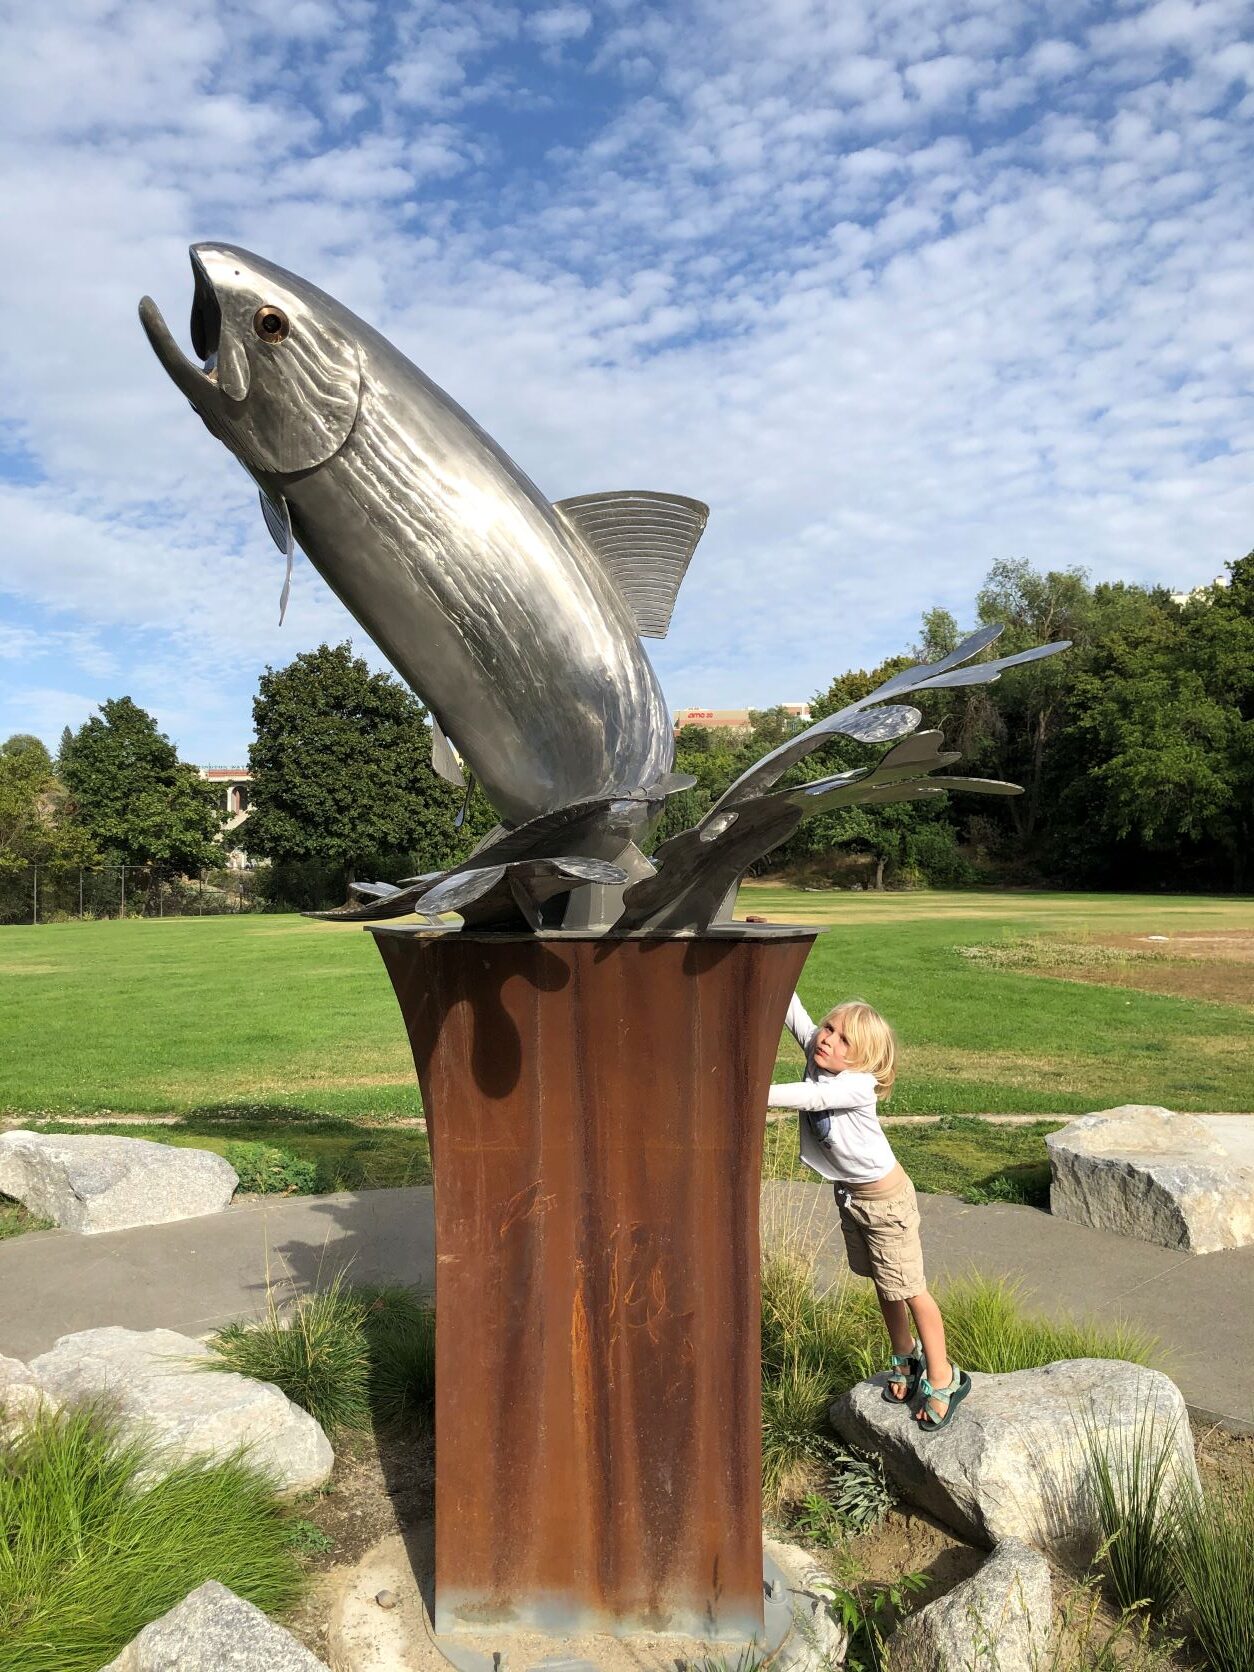 Young boy leaning against the wooden base displaying metal sculpture of redband trout at Redband Park in Spokane.